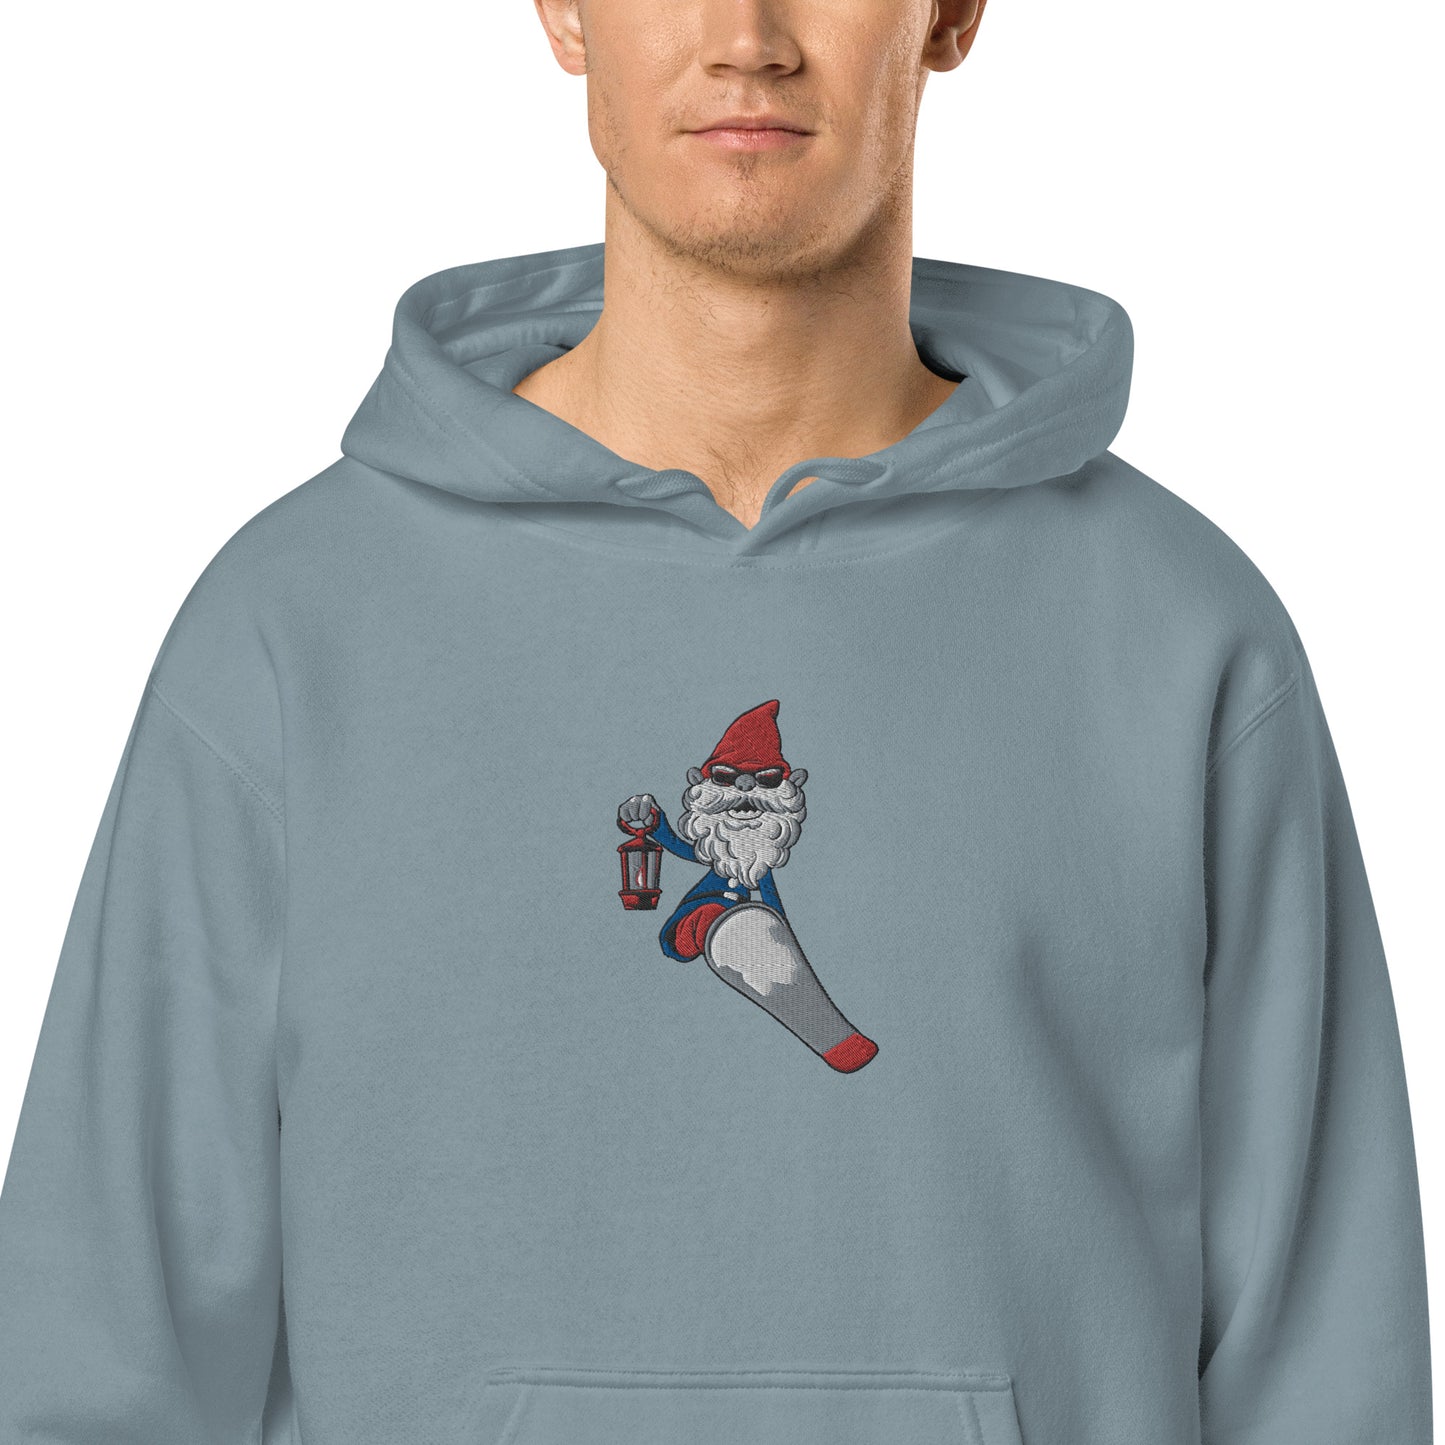 ZZ the Sgnomes pigment-dyed hoodie